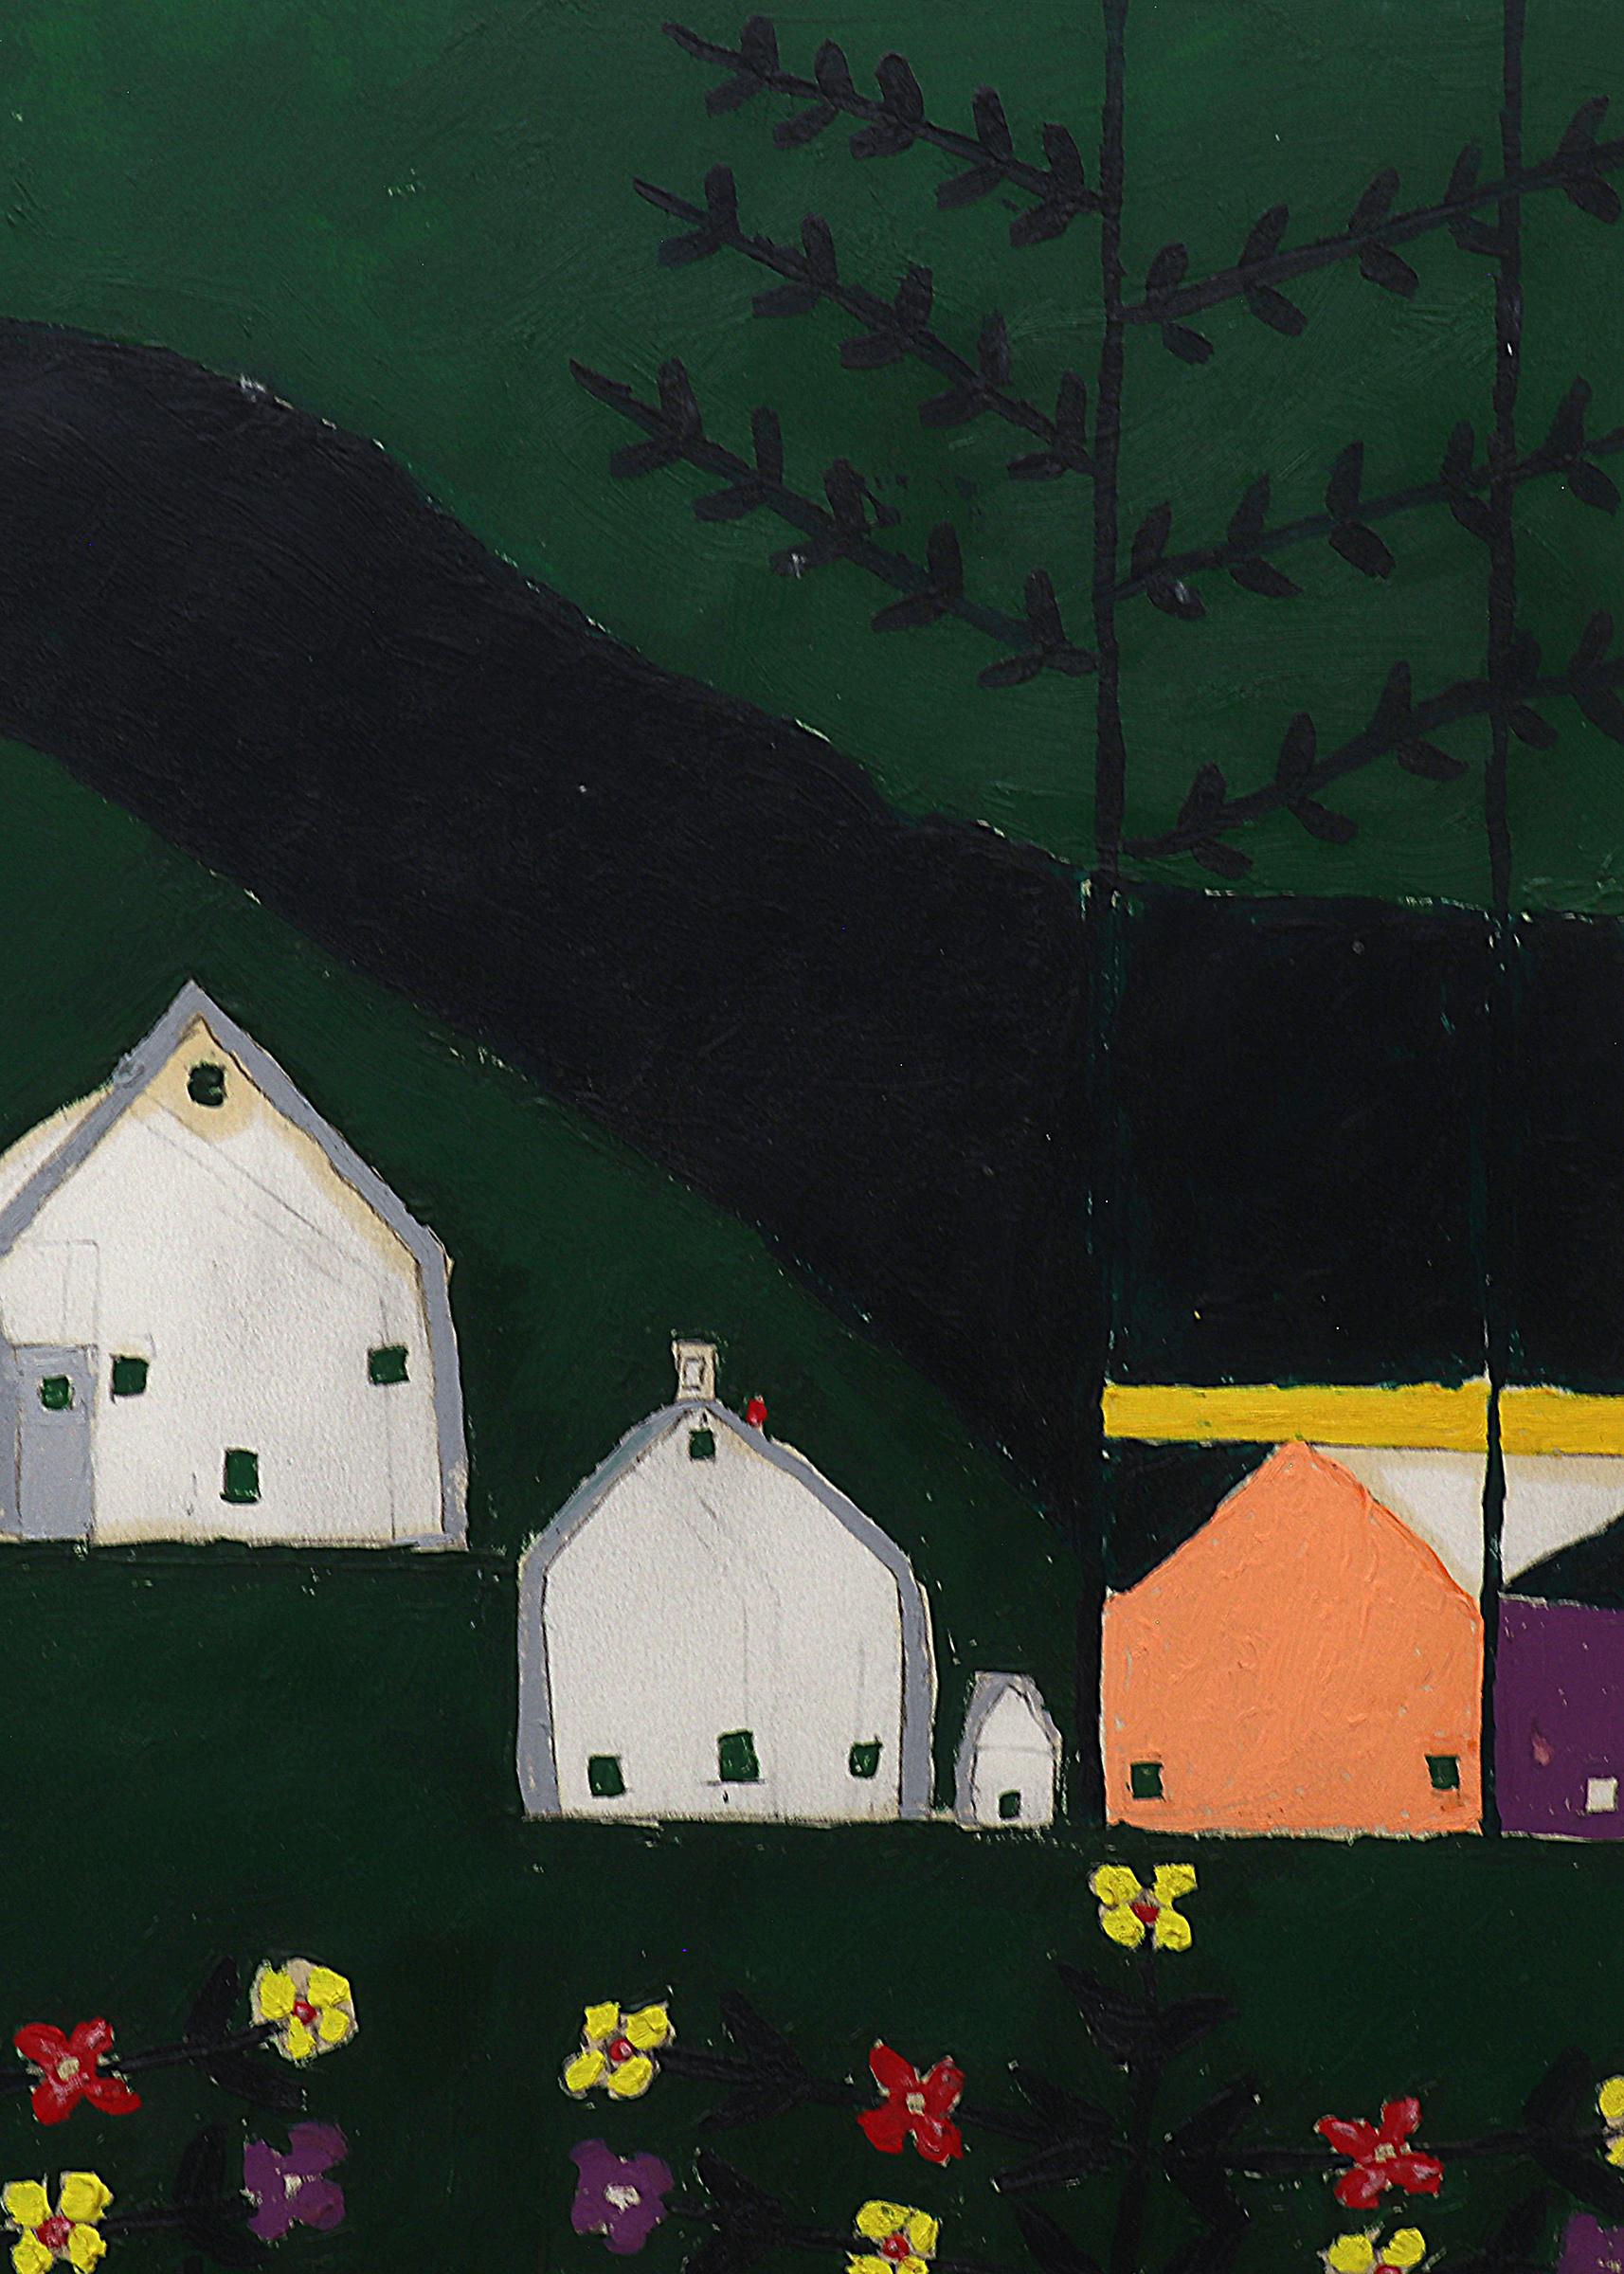 Oil on board painting by Martin Saldana (1874-1965) titled 'Farm and Figures'. Presented in a custom frame measuring 21 ½ x 26 ¼ inches; image size is 14 x 19 ⅛ inches. Titled by the artist verso. 

Dark green background with flowers, houses, and